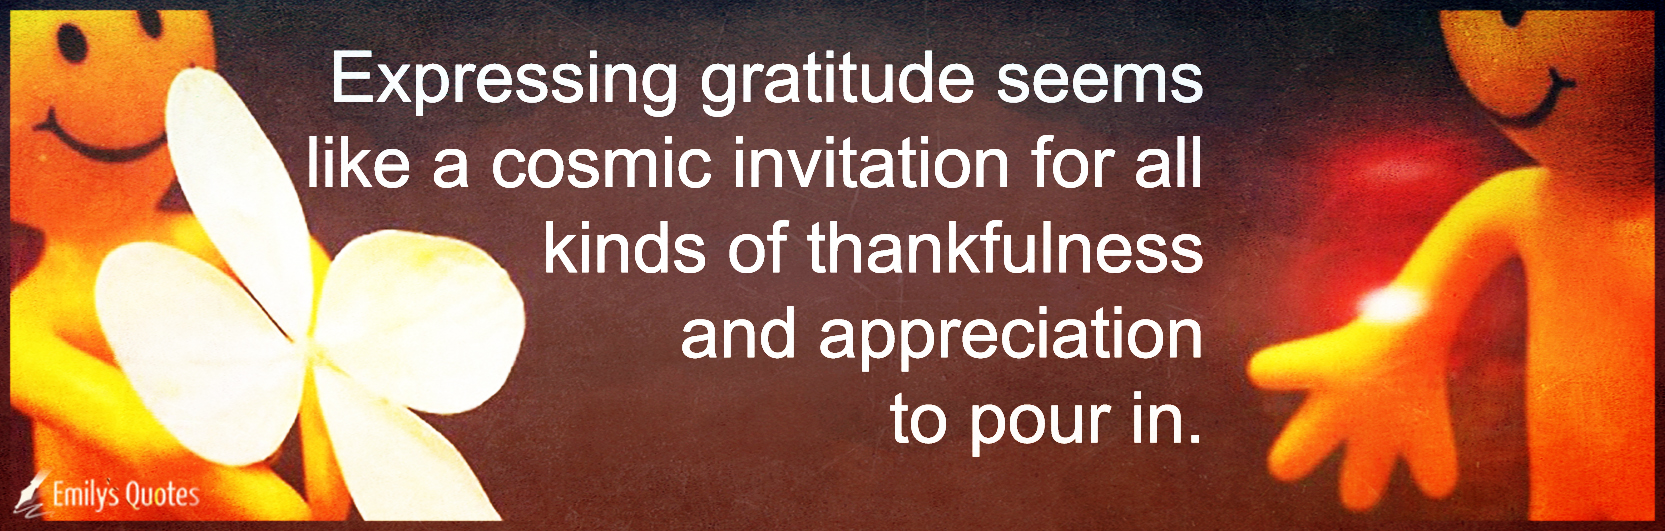 Expressing gratitude seems like a cosmic invitation for all kinds of thankfulness and